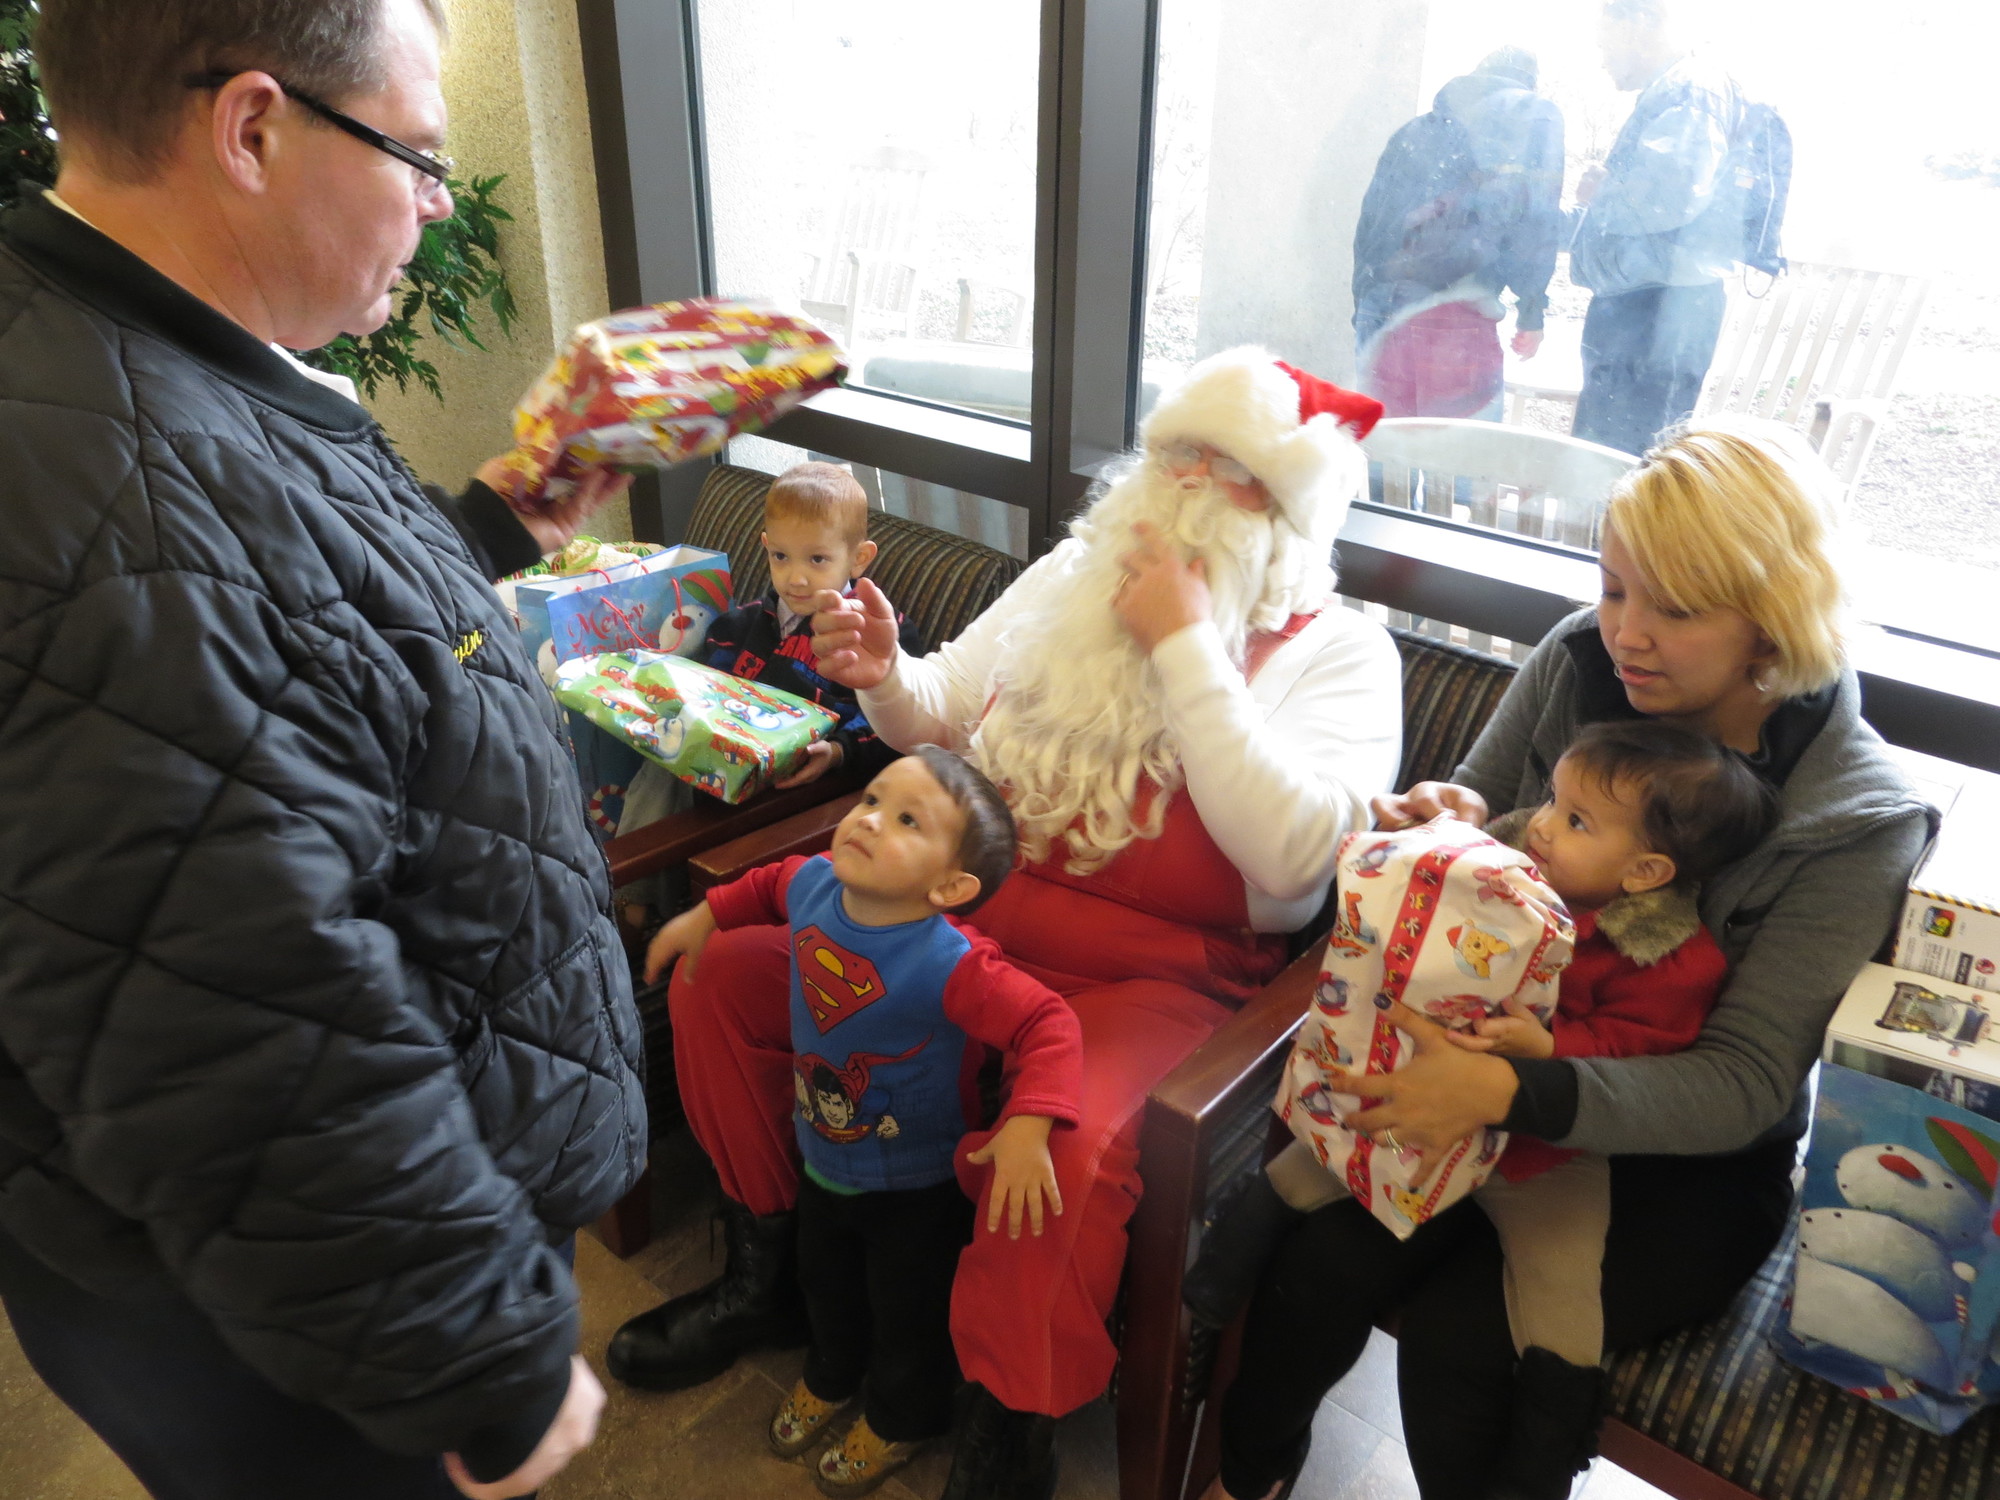 Ex-Chief Kevin Bien handed Christmas presents to the children.